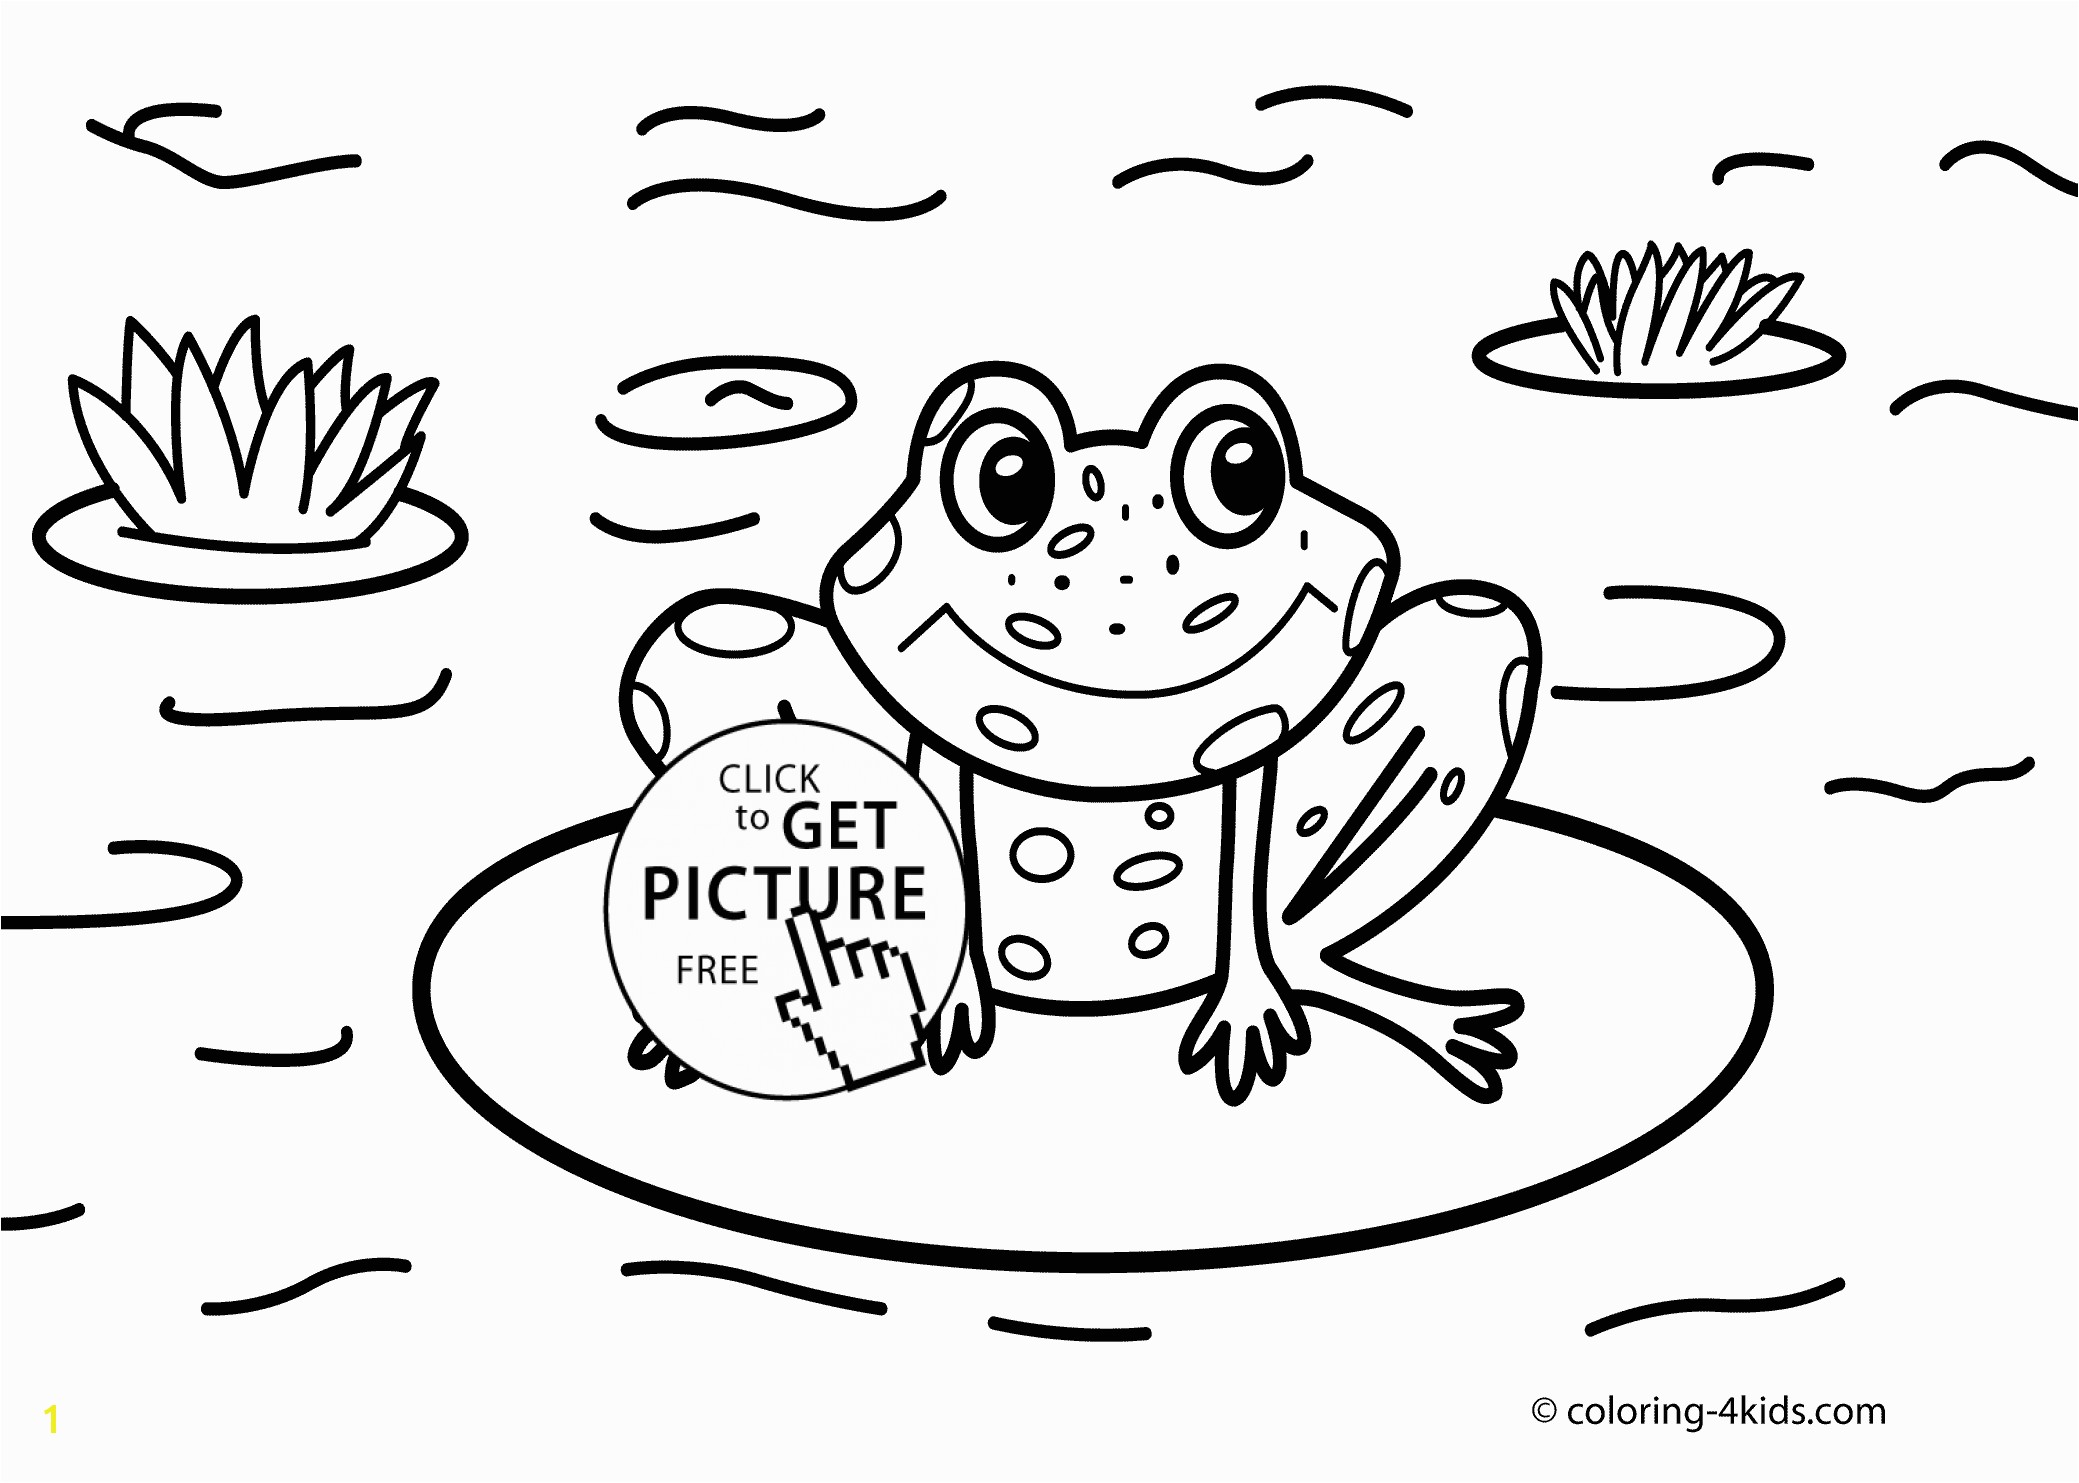 Frog and Lily Pad Coloring Pages Ideas Frog Coloring Sheet Color Picture A Animal Page Tree Ruva